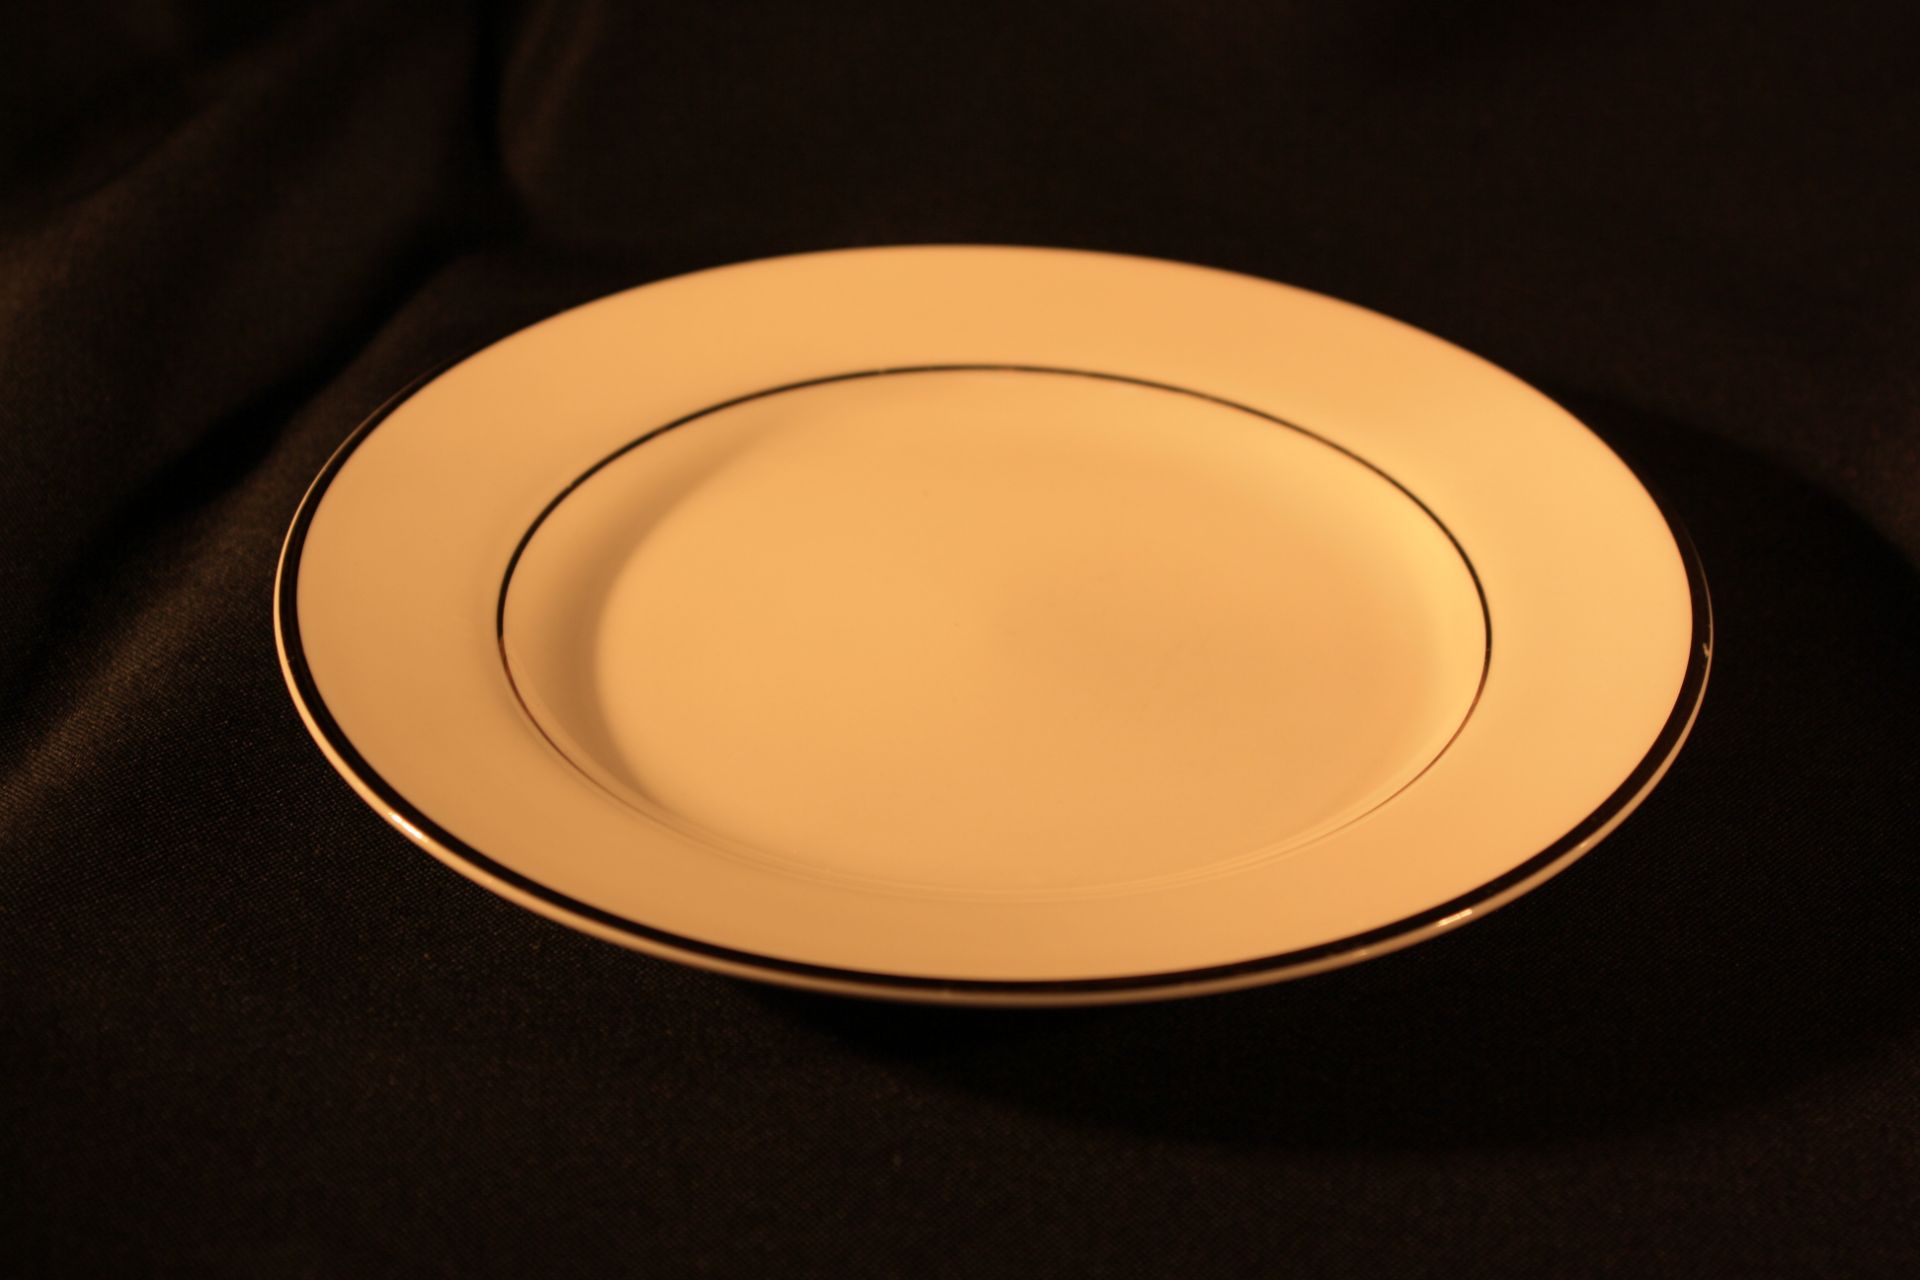 Lot of 525 Ivory Gold Band Salad Plates, 7"